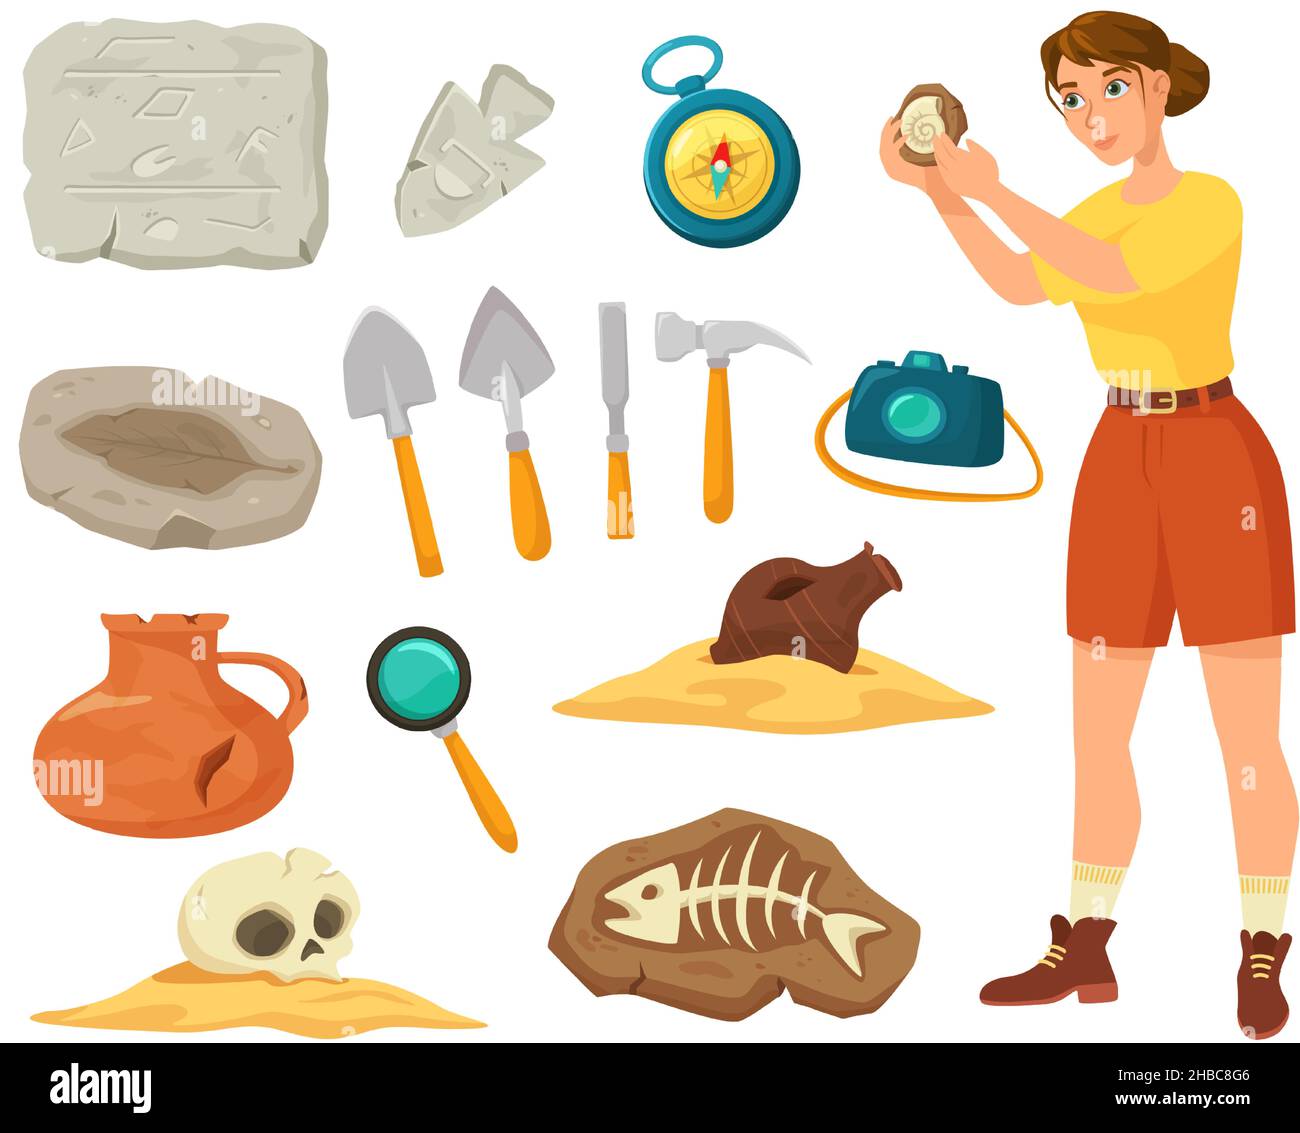 Cartoon archaeological tools and equipment, ancient artifacts and fossils. Archaeologist at work, archeology expedition elements vector set. Female character exploring bones, excavation concept Stock Vector